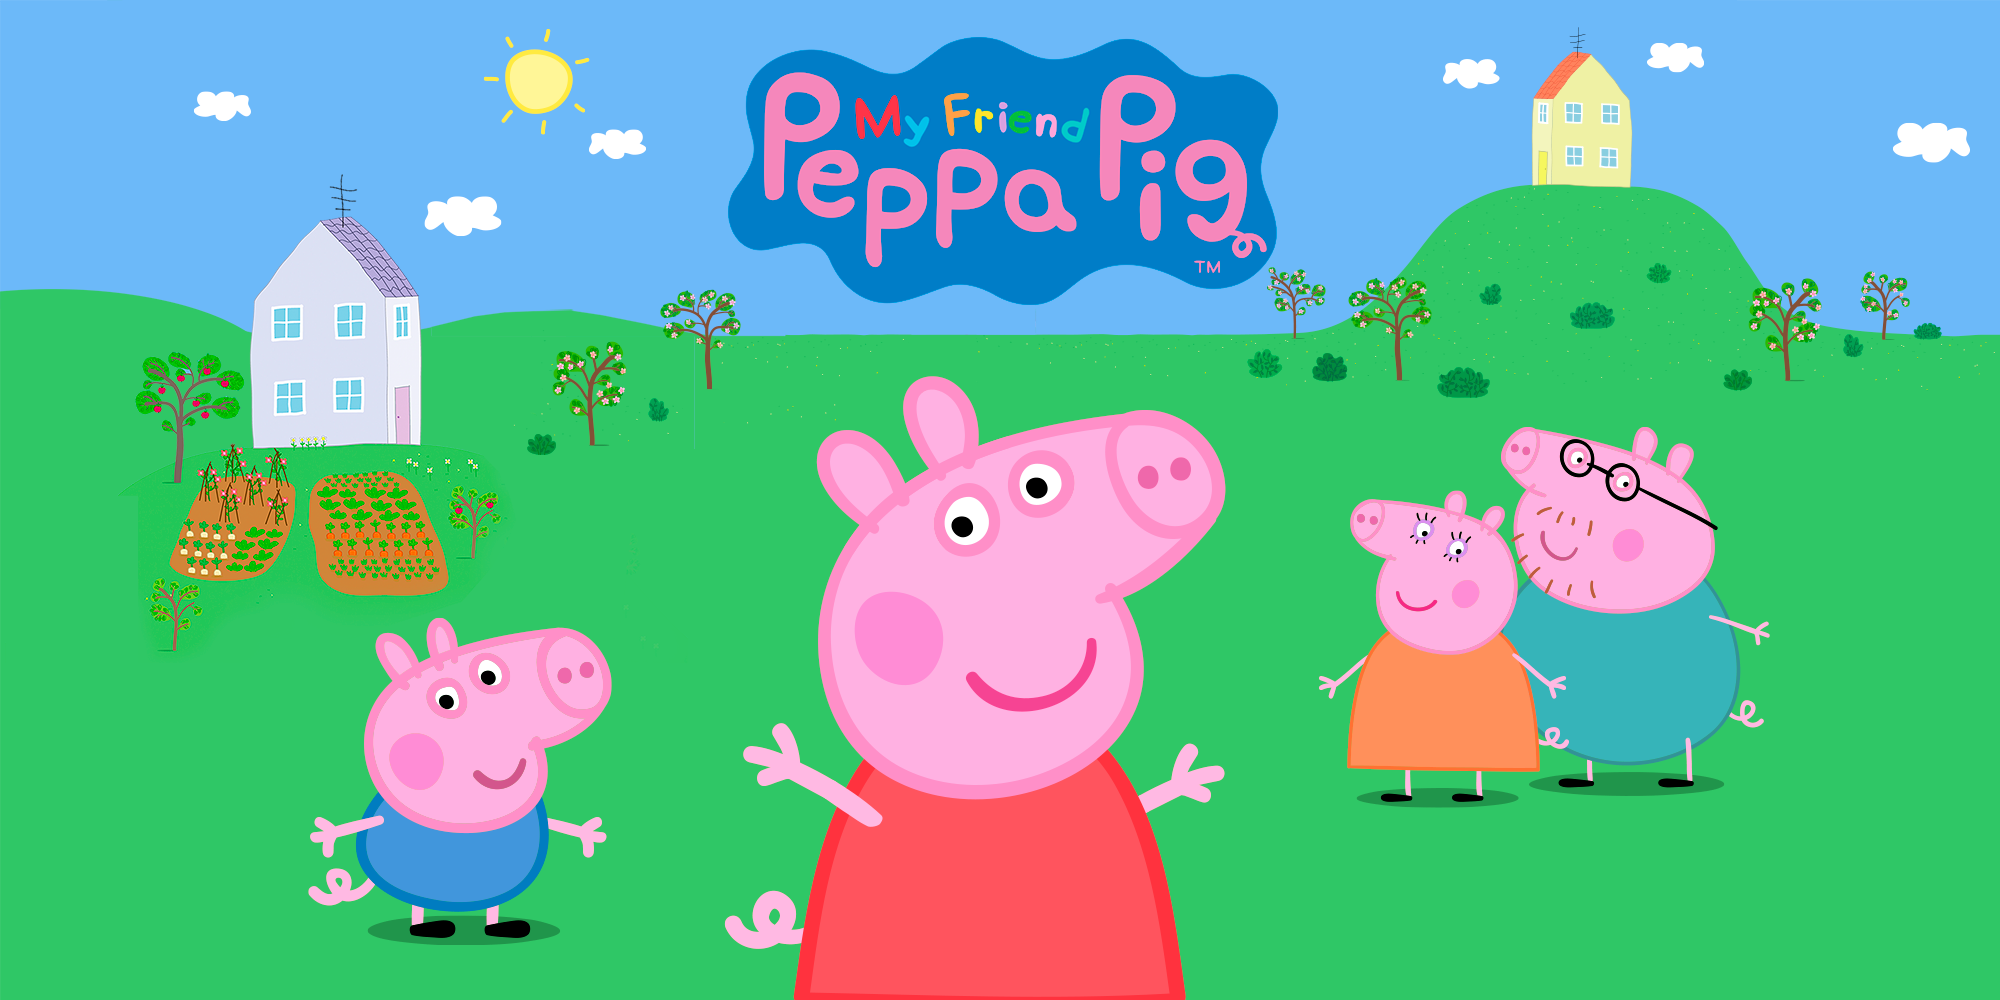 NickALive!: Outright Games to Release 'My Friend Peppa Pig' Video Game  During Fall 2021